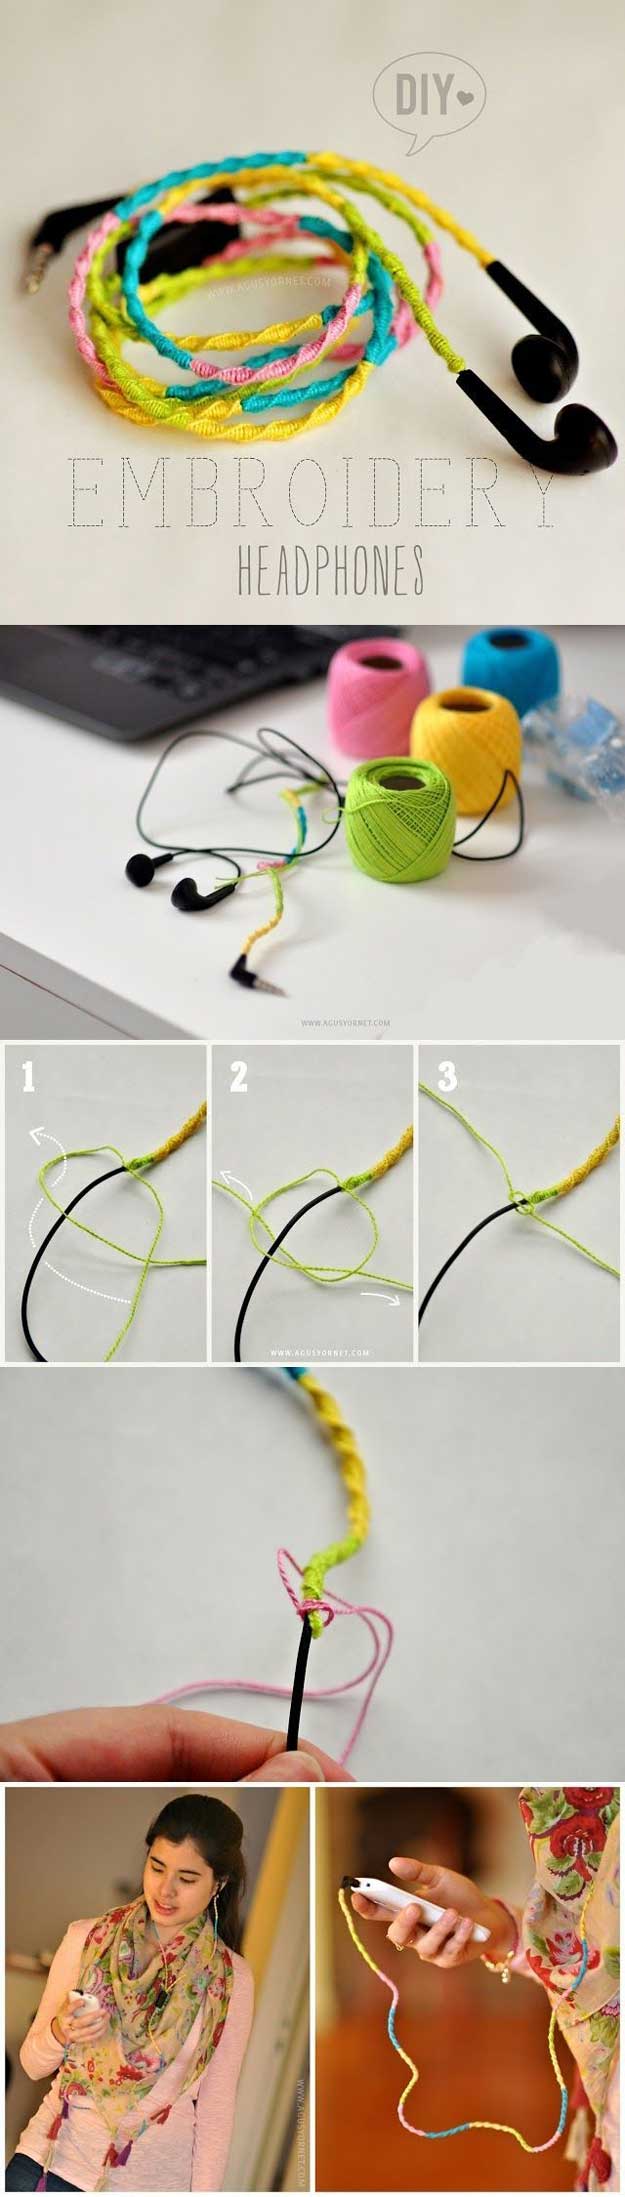 Cool DIY Ideas for Your iPhone iPad Tablets & Phones | Fun Projects for Chargers, Cases and Headphones | DIY: Embrodery Headphones #diygadgets #stem #techtoys #iphone